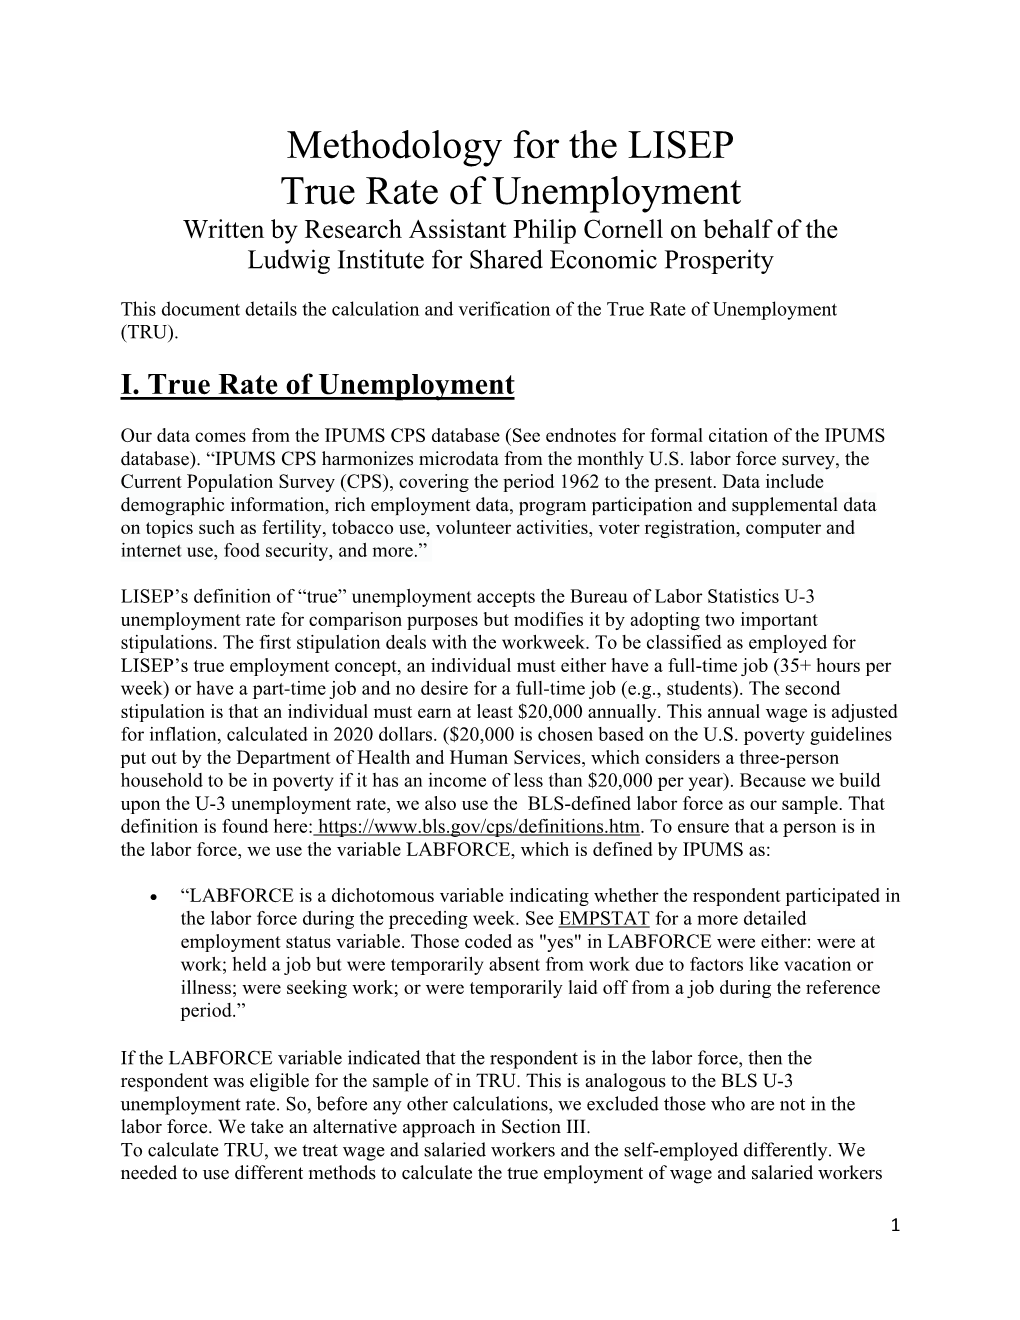 Methodology for the LISEP True Rate of Unemployment Written by Research Assistant Philip Cornell on Behalf of the Ludwig Institute for Shared Economic Prosperity